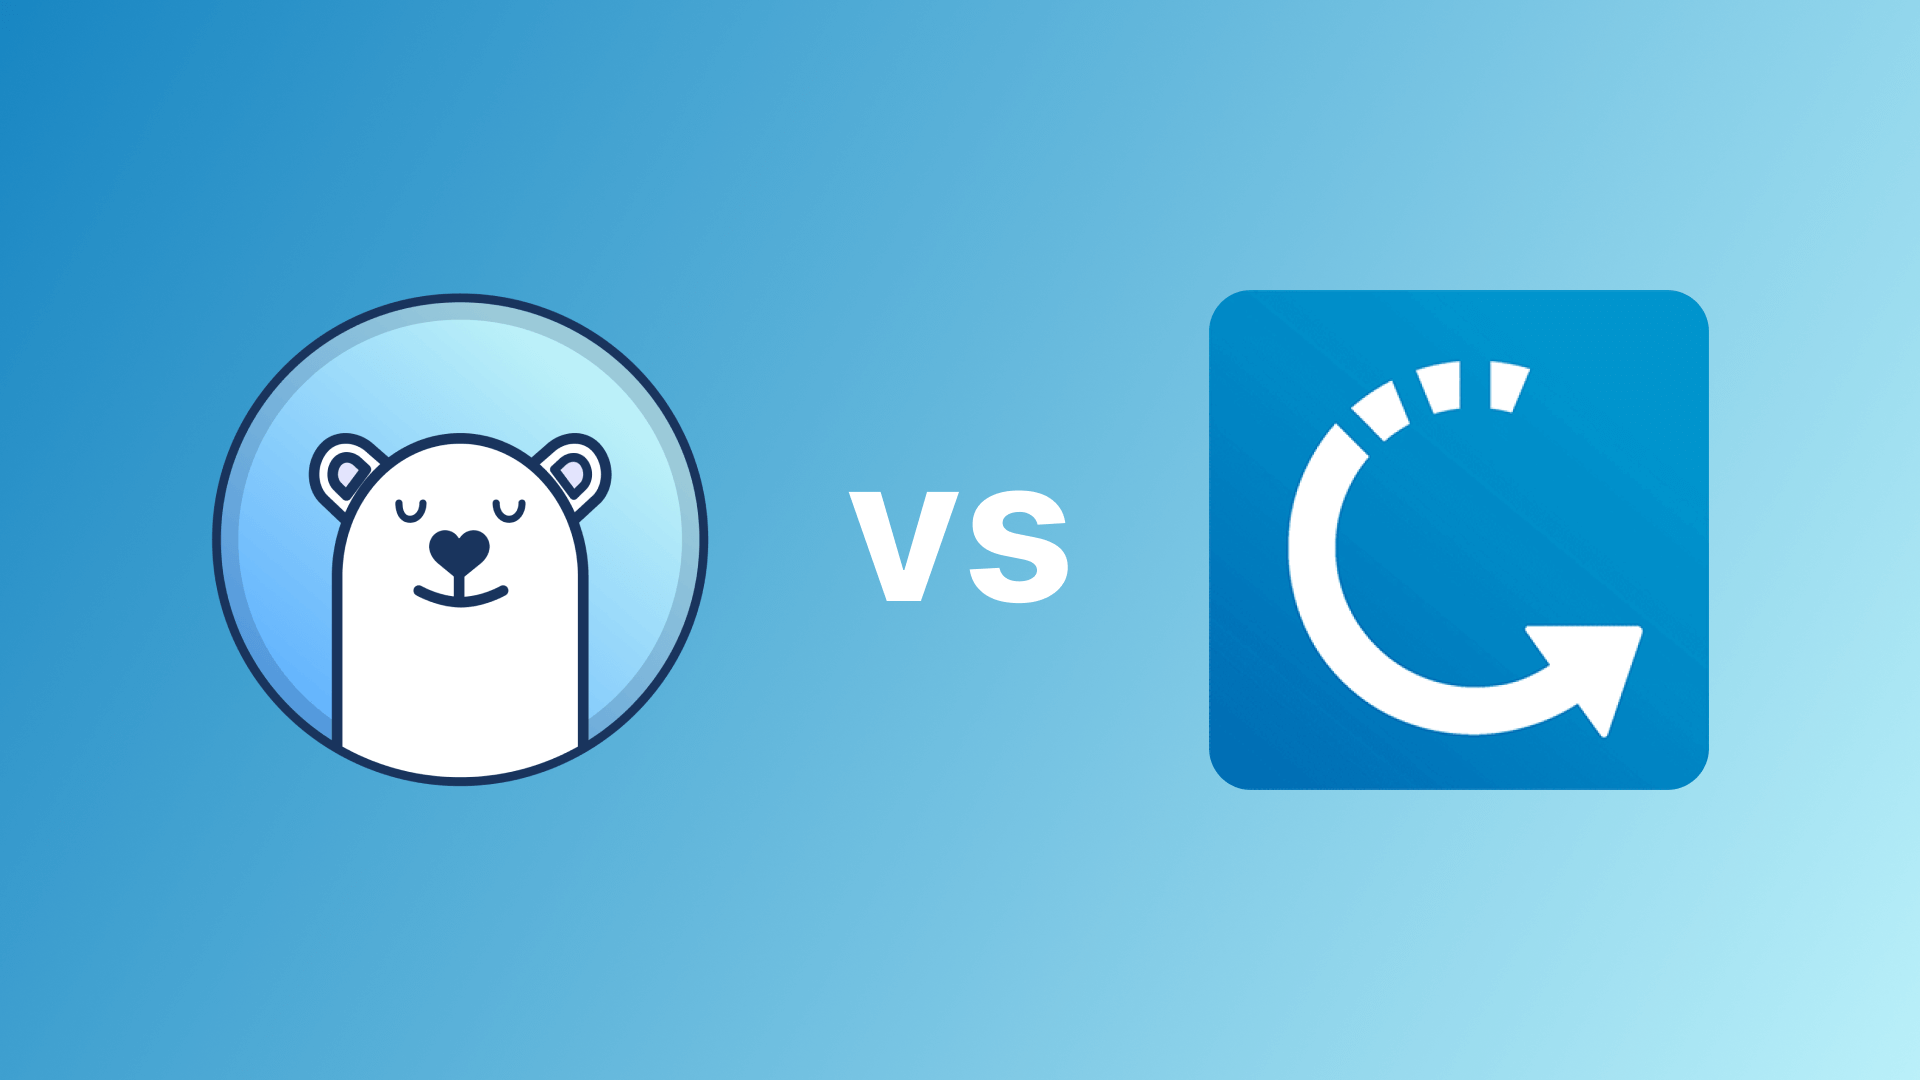 Bearable vs Careclinic, which one is better?